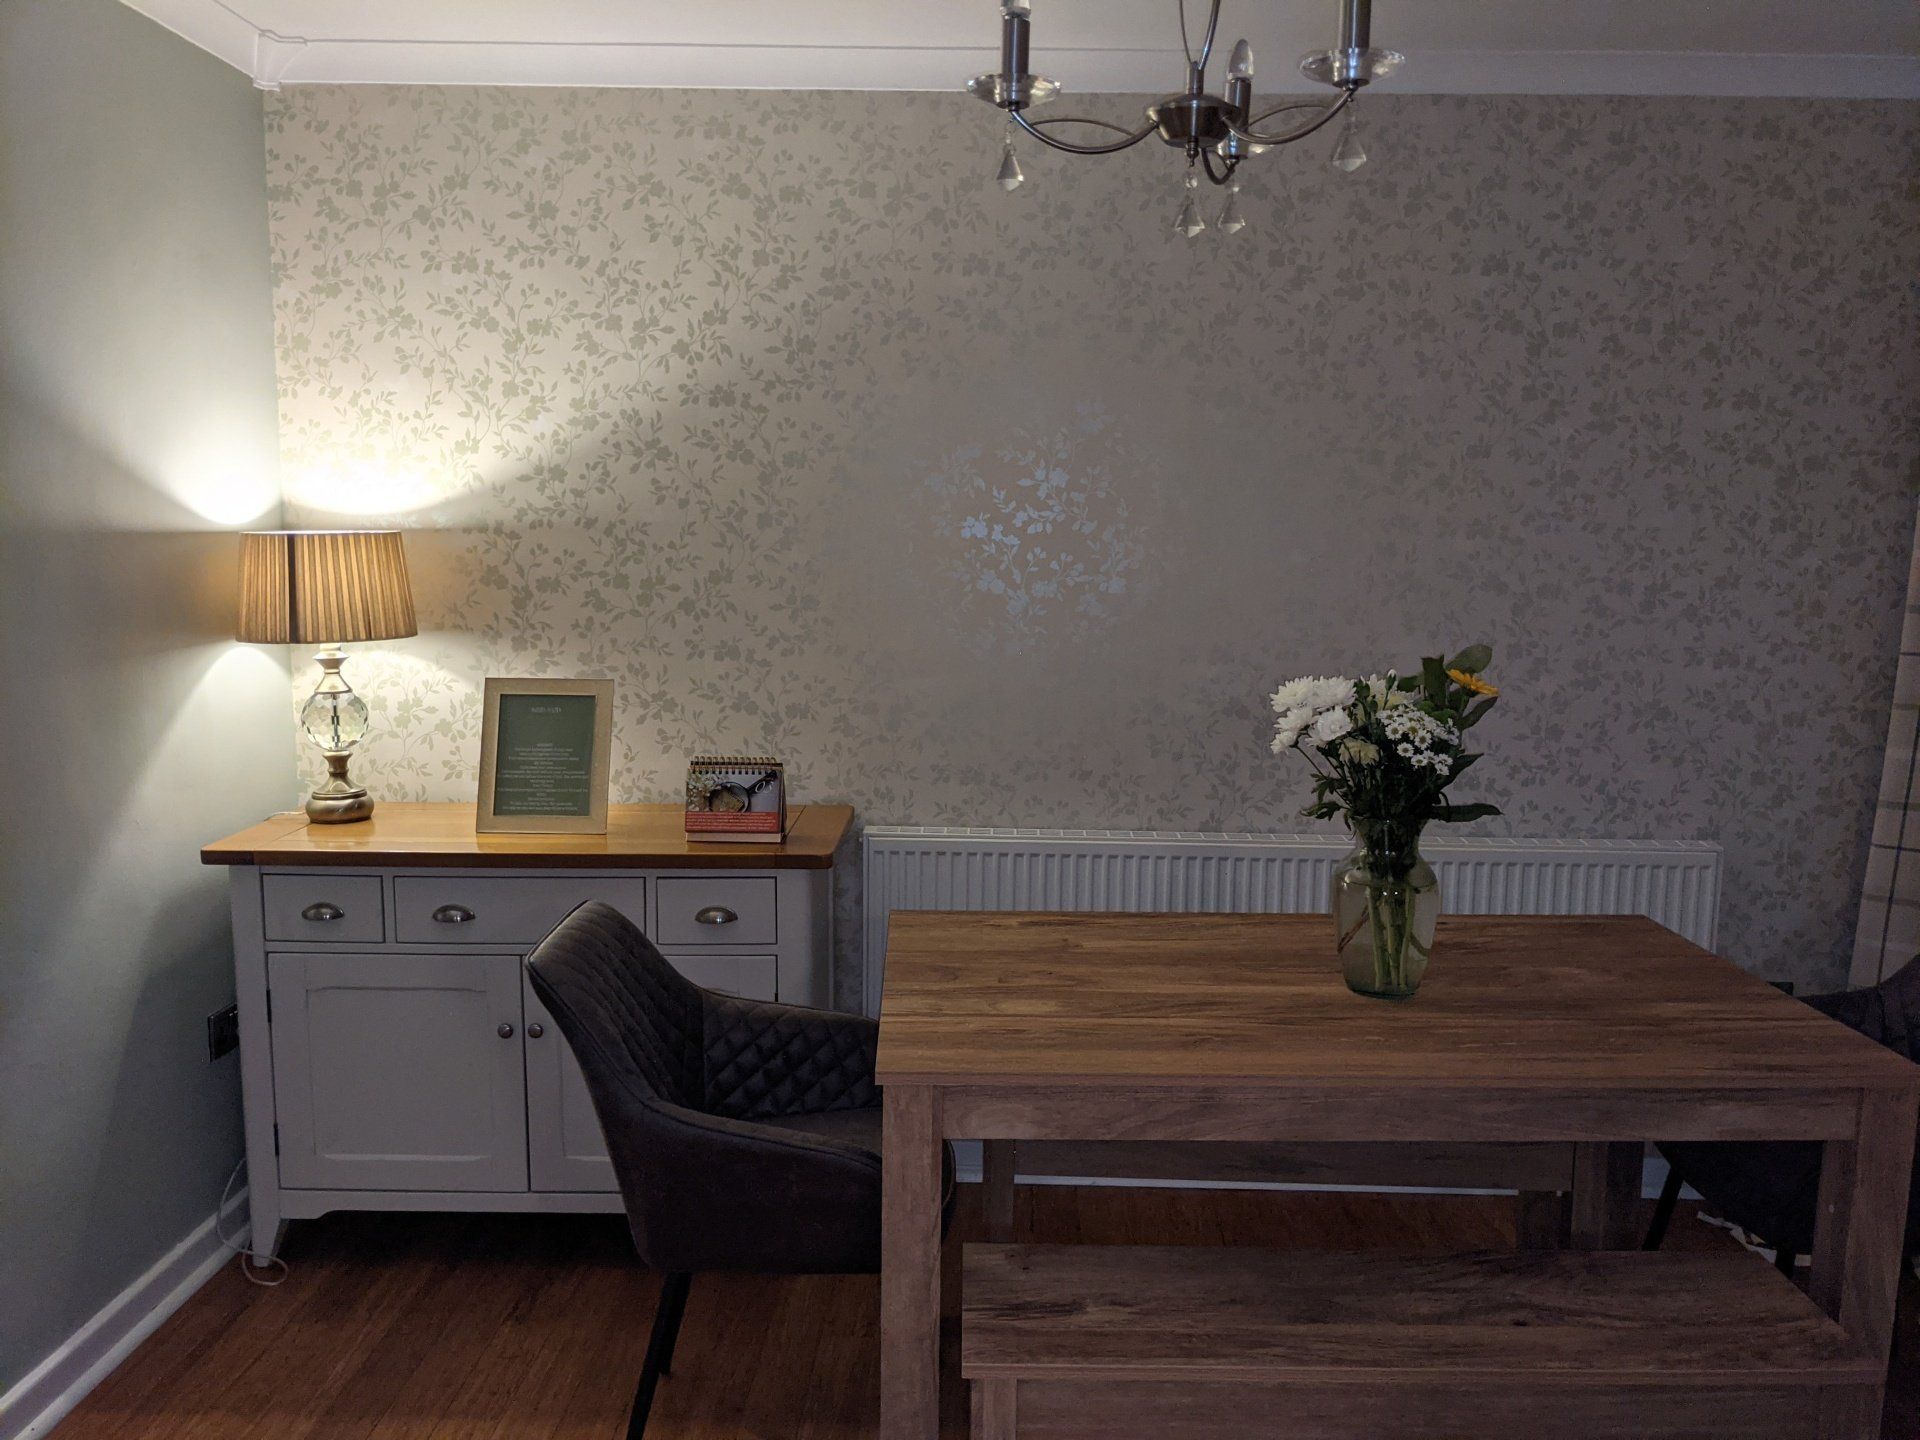 Picture of a modern kitchen diner painted in light green with floral designer wallpaper on the feature wall. There is a side table with lamp in the corner of the room.